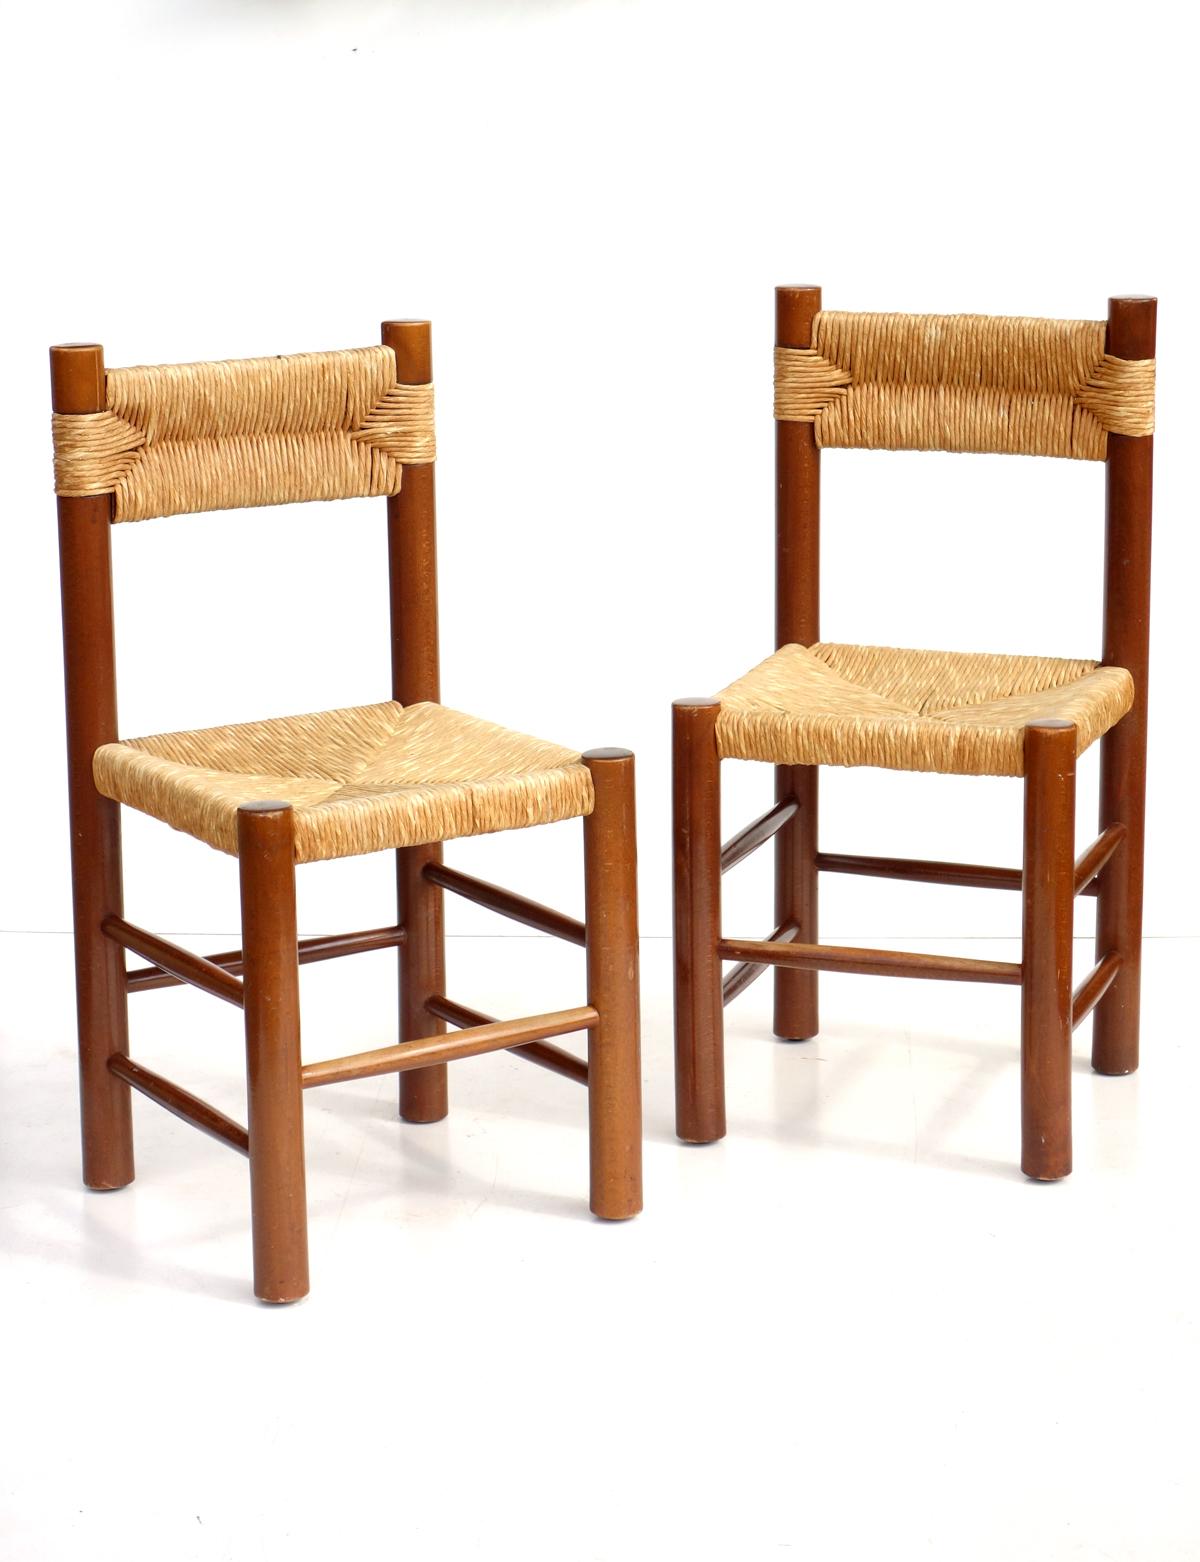 Wicker and wood
Excellent condition
Set of 6.
In the style of Charlotte Perriand, purchased in France